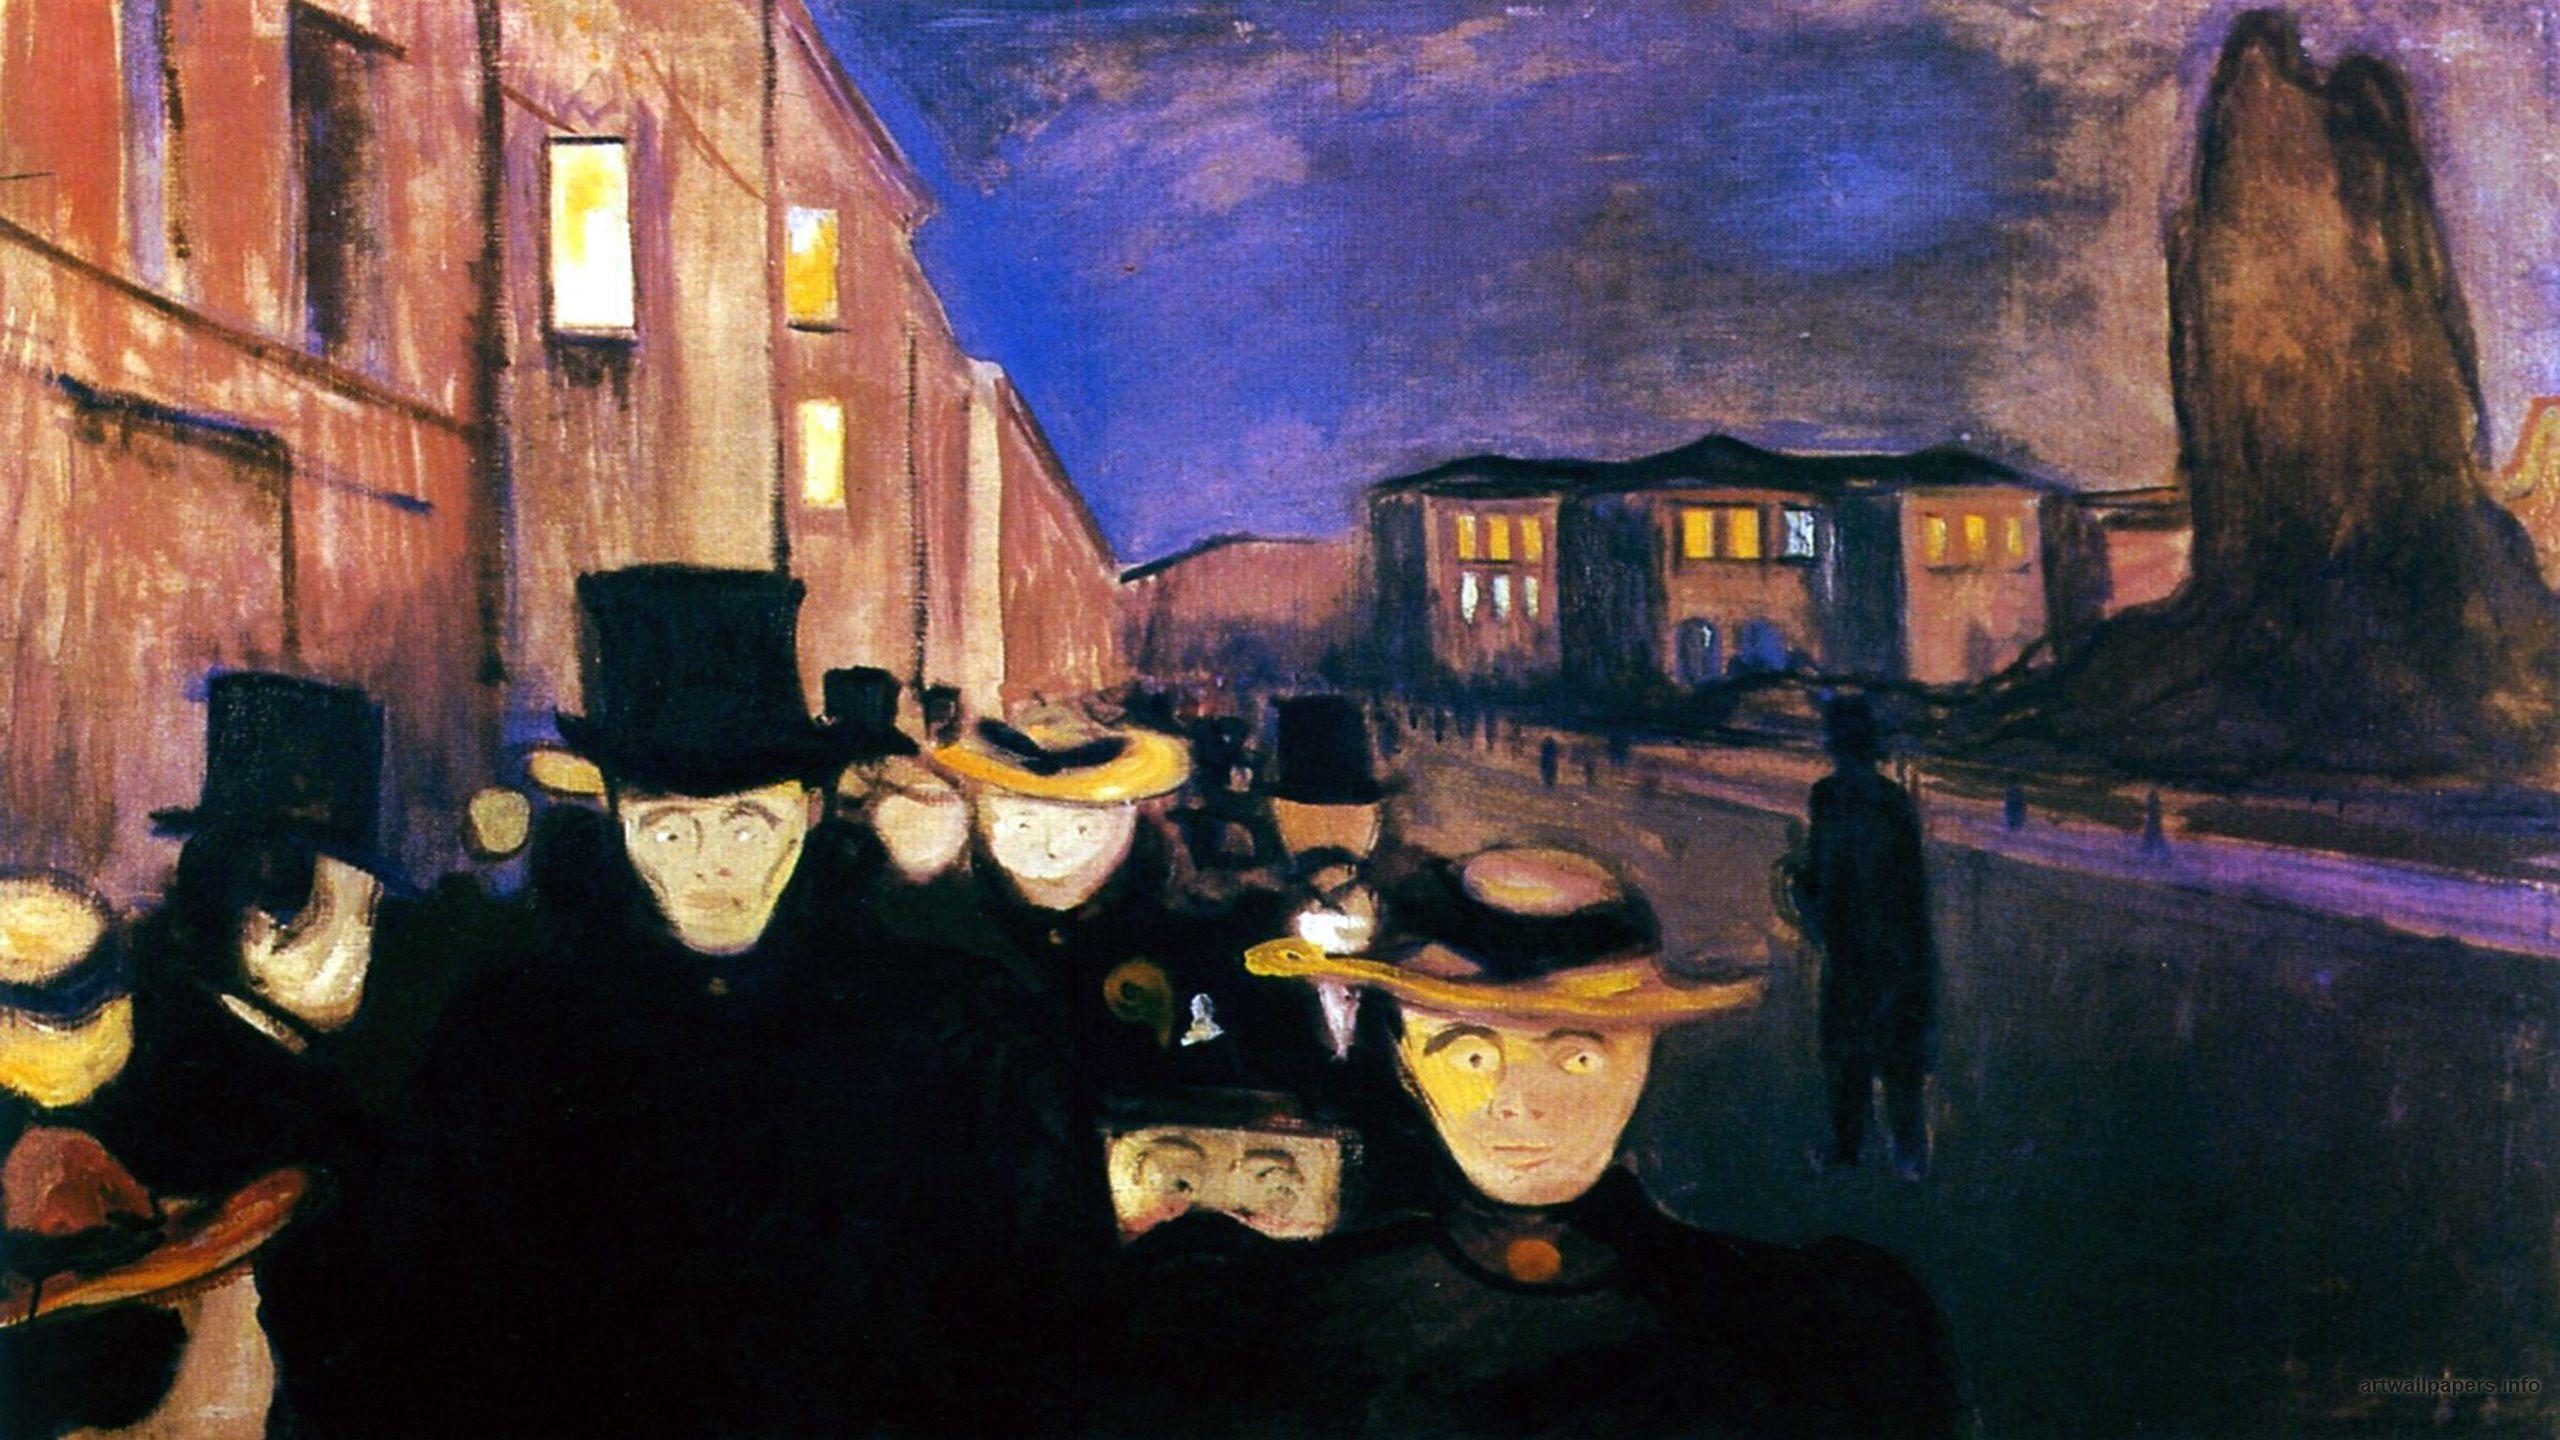 Painting Edvard Munch Street wallpaper and image